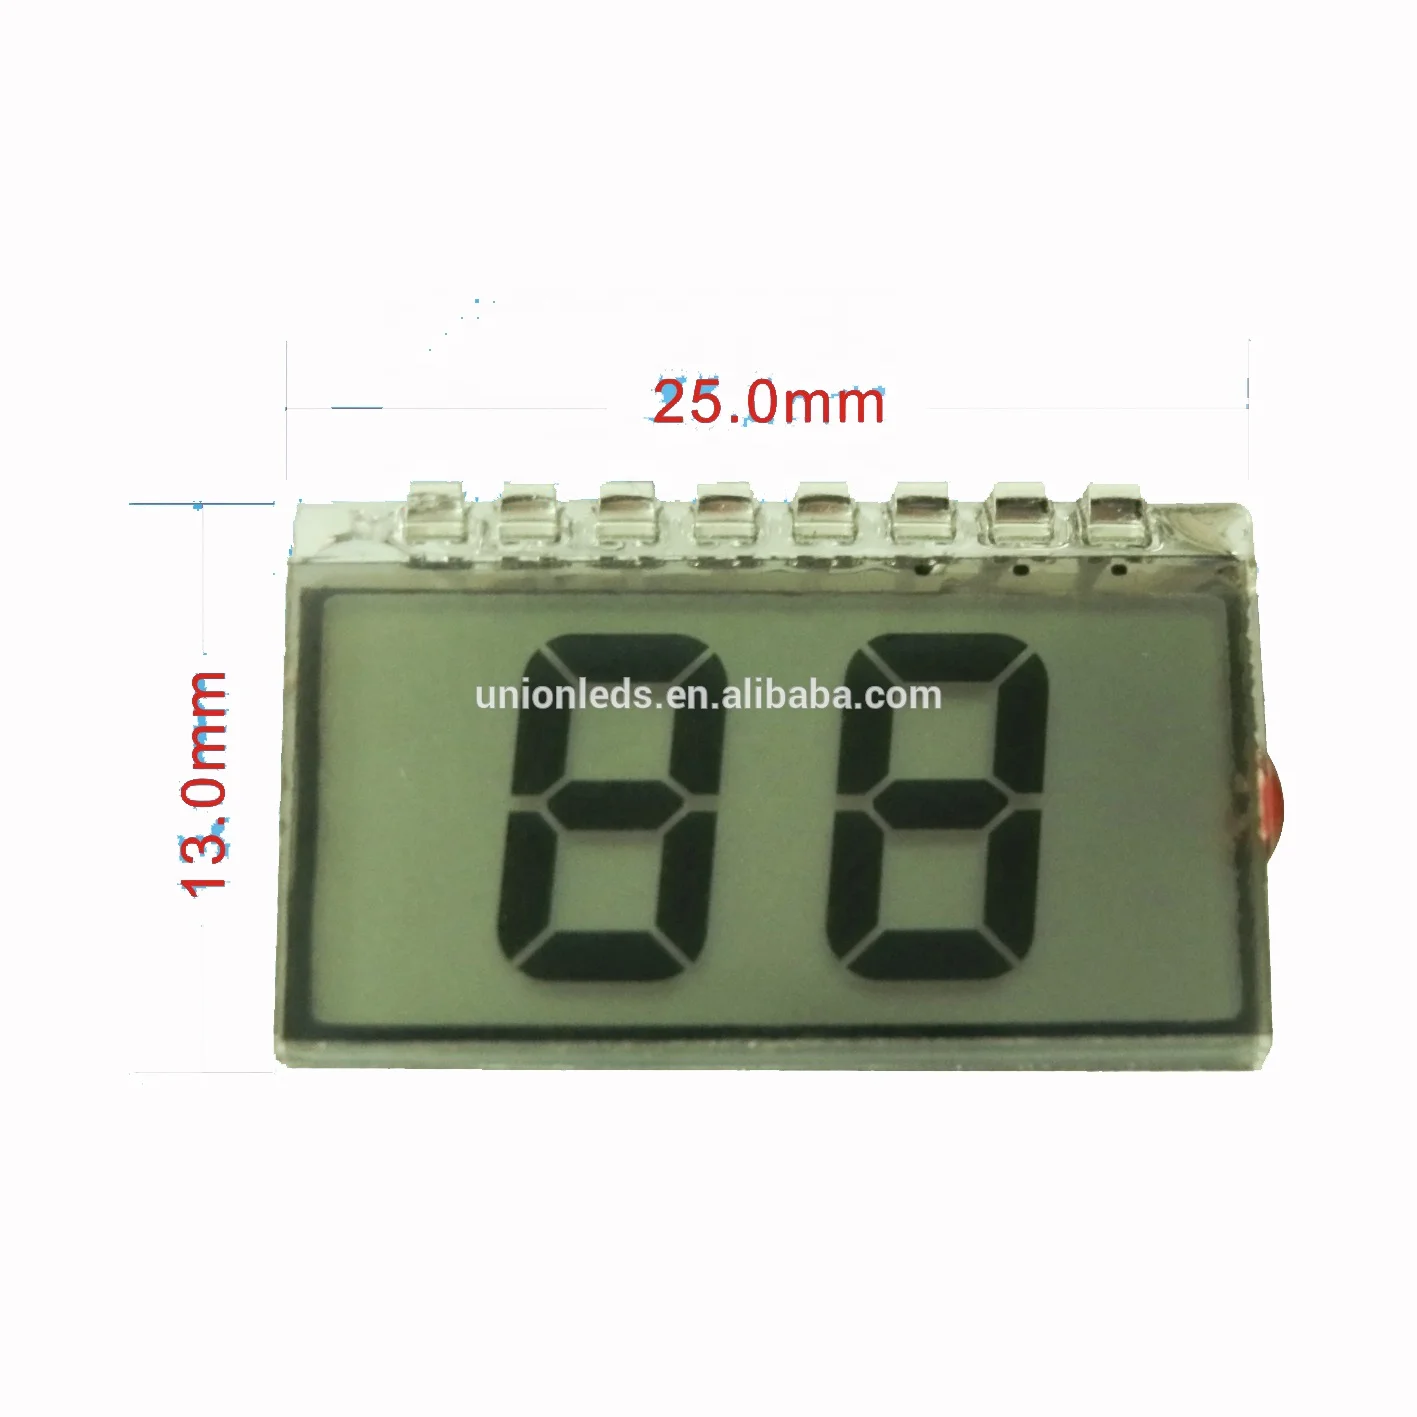 
Lower Cost 2 Digit Segment Display Glass LCD Screen with TN Type  (62067549691)